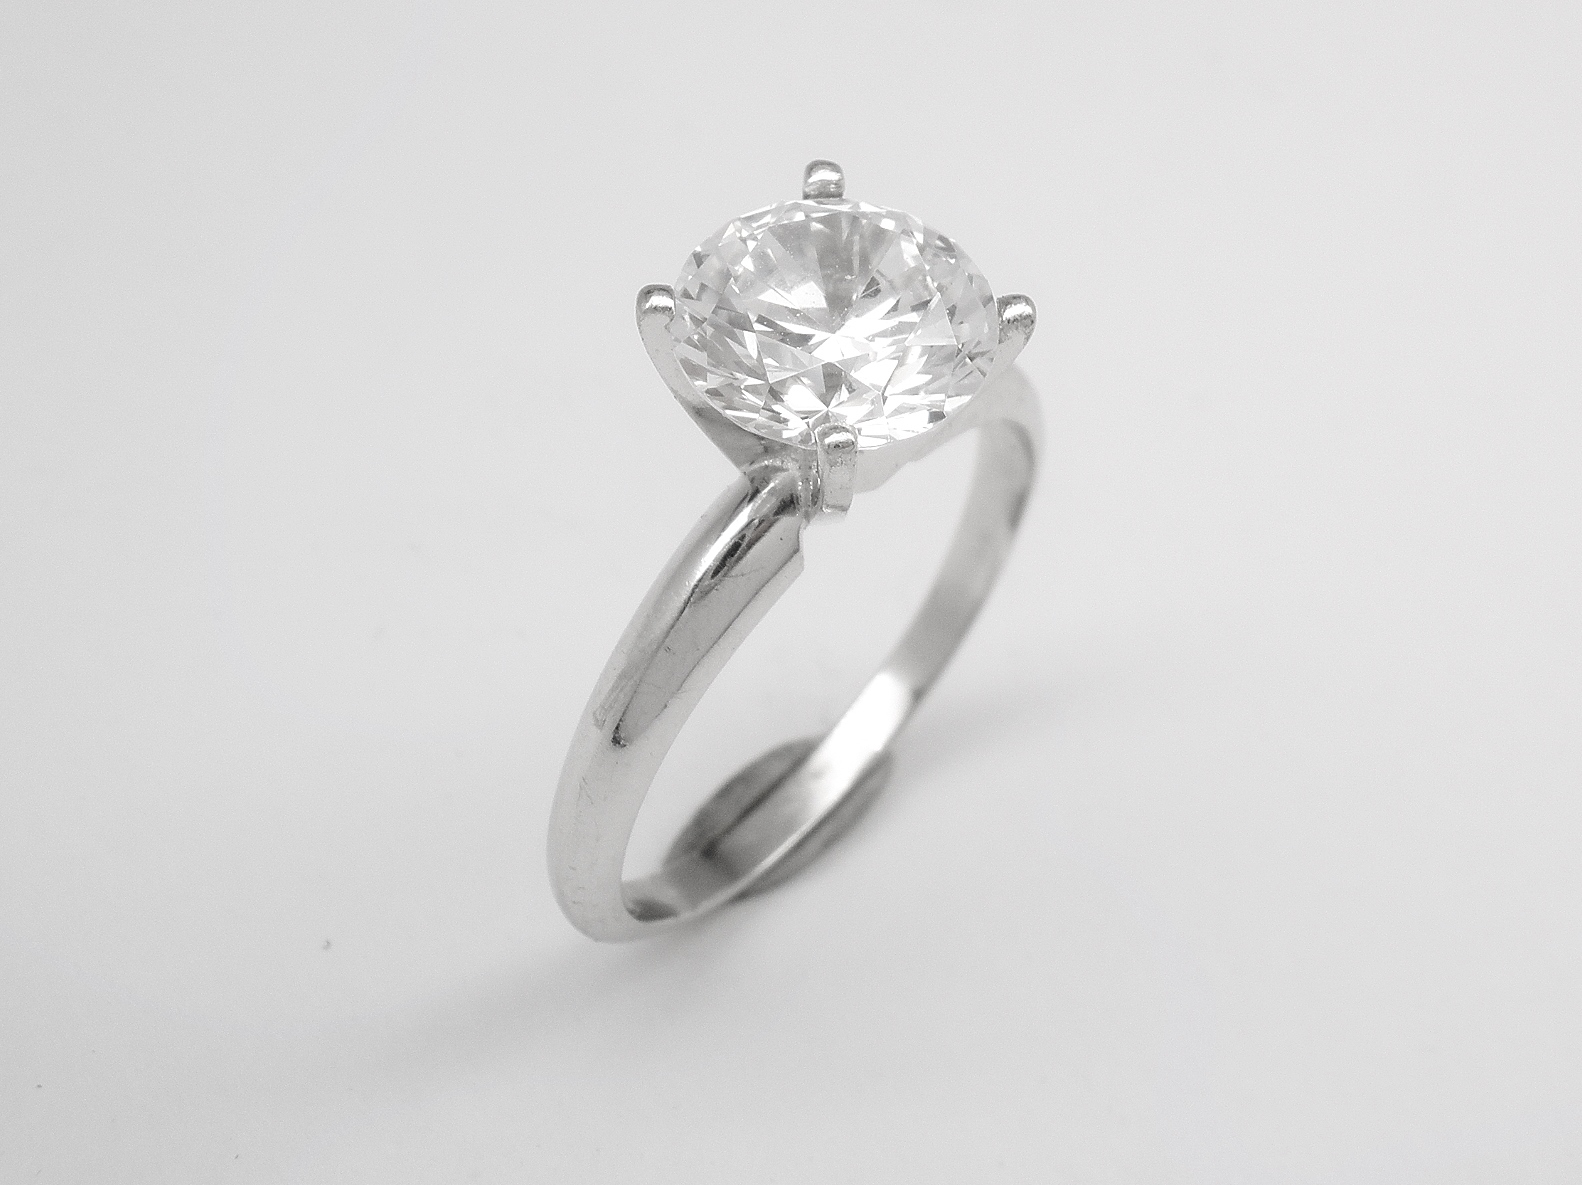 The original engagement ring mount had the 1.2ct. diamond set in 4 chunky claws and a shank that was low and broad where it was attached to the setting. This look did nothing to show off the diamond to its best effect.